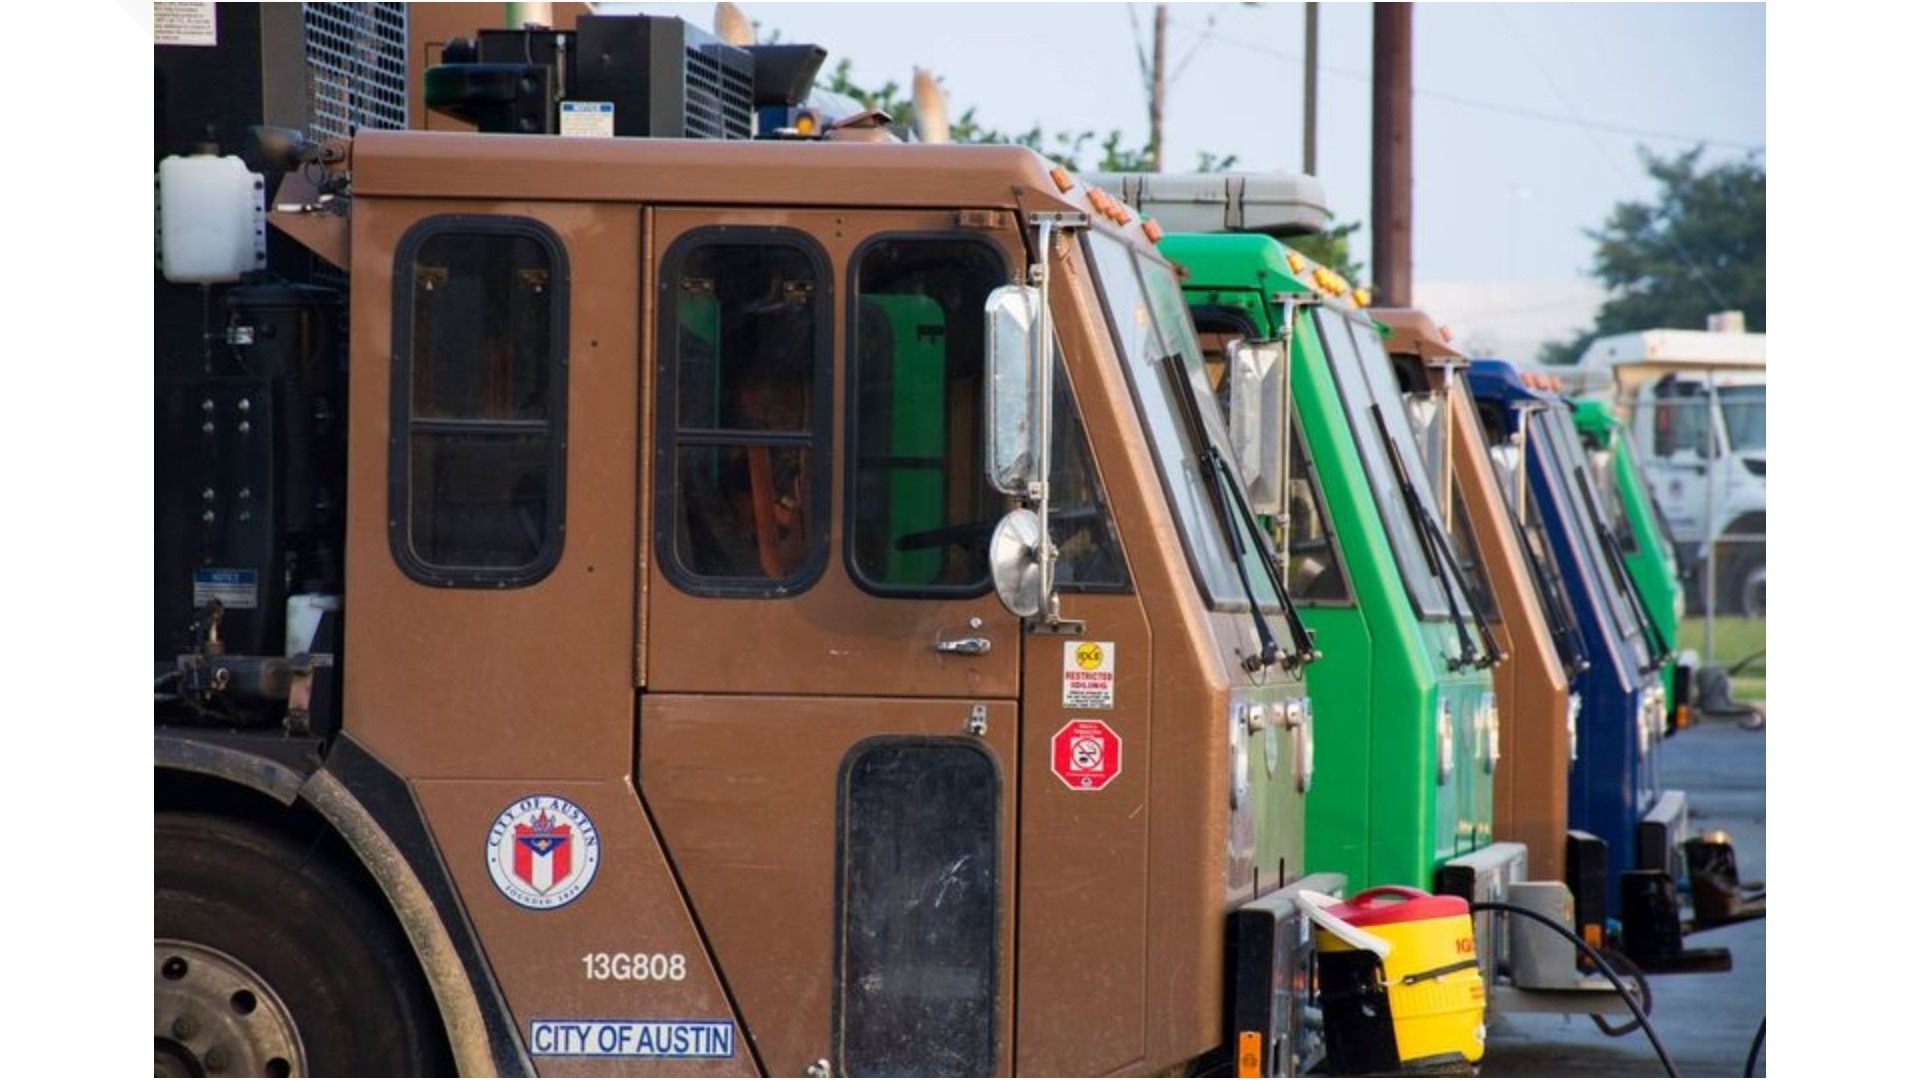 City of Austin temporarily suspending large brush and bulk collection due to staffing shortages